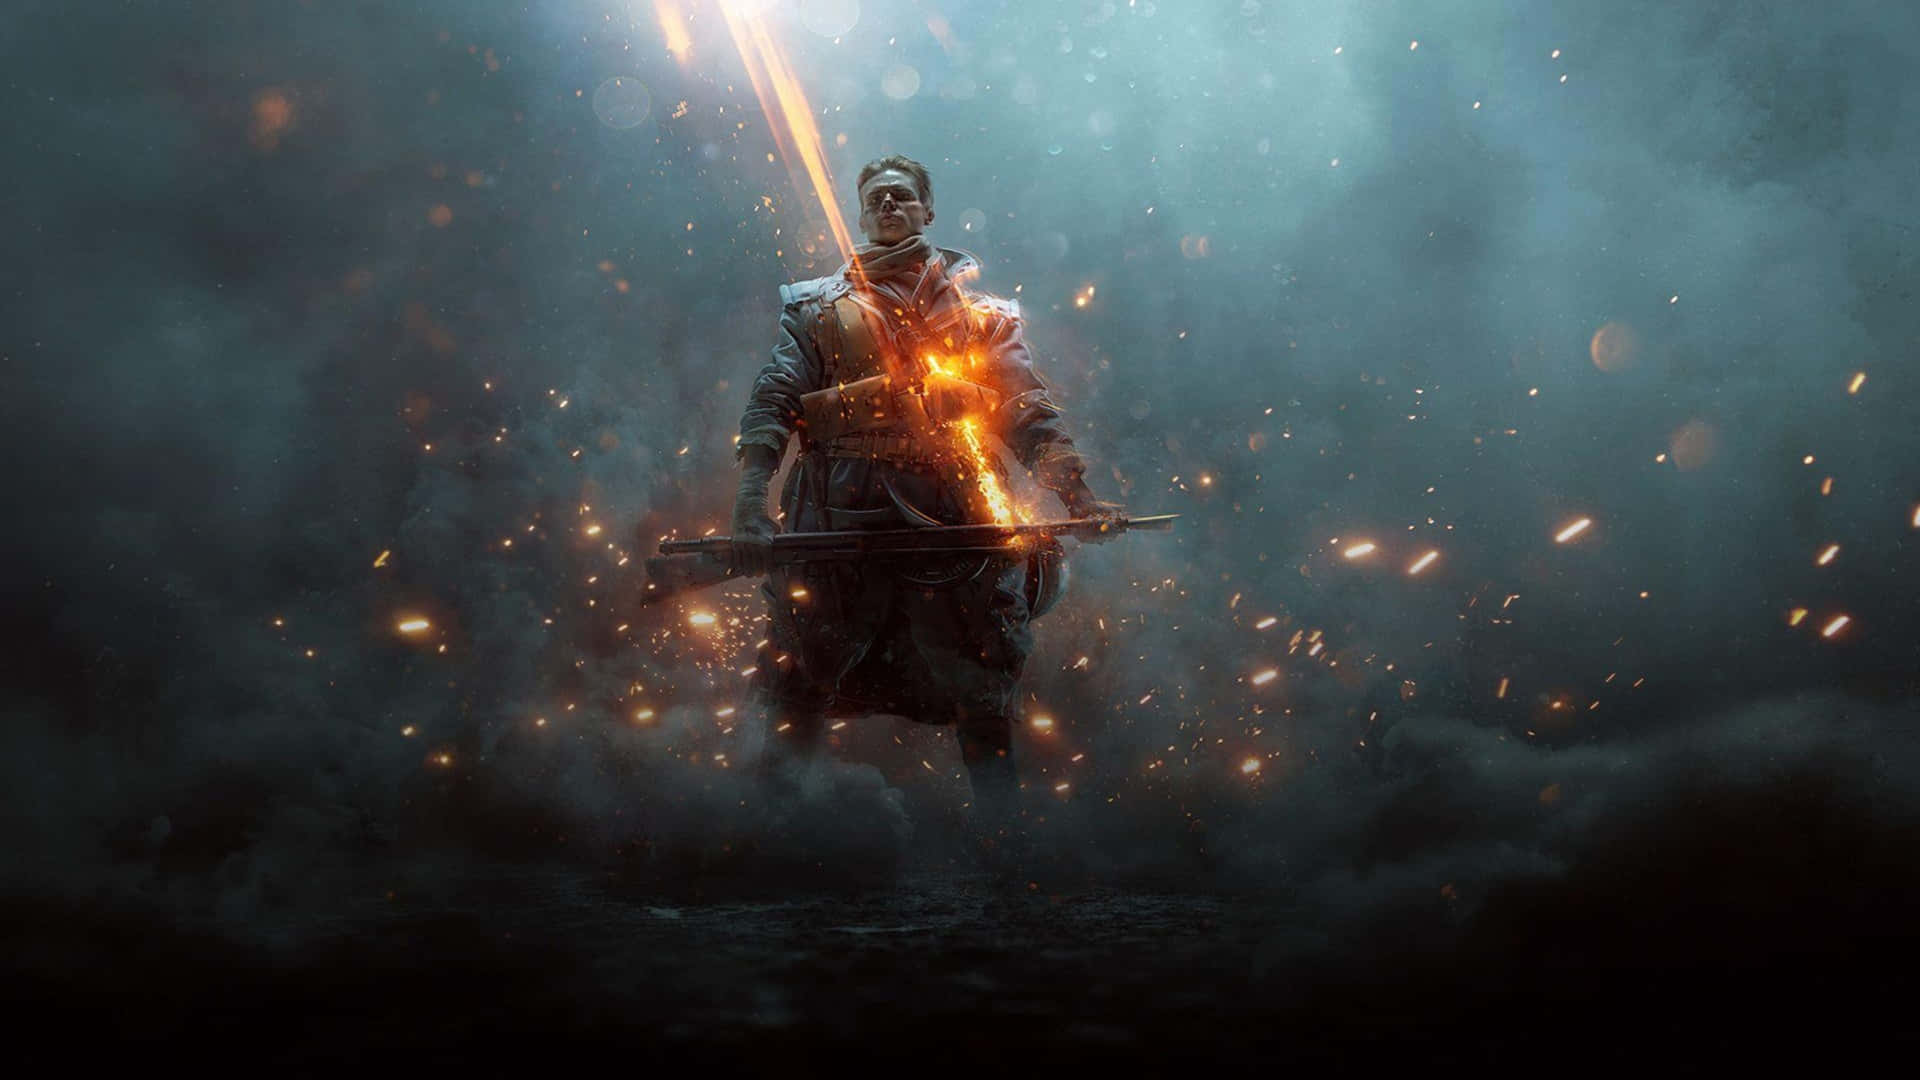 1440p Battlefield 1 They Shall Not Pass Background